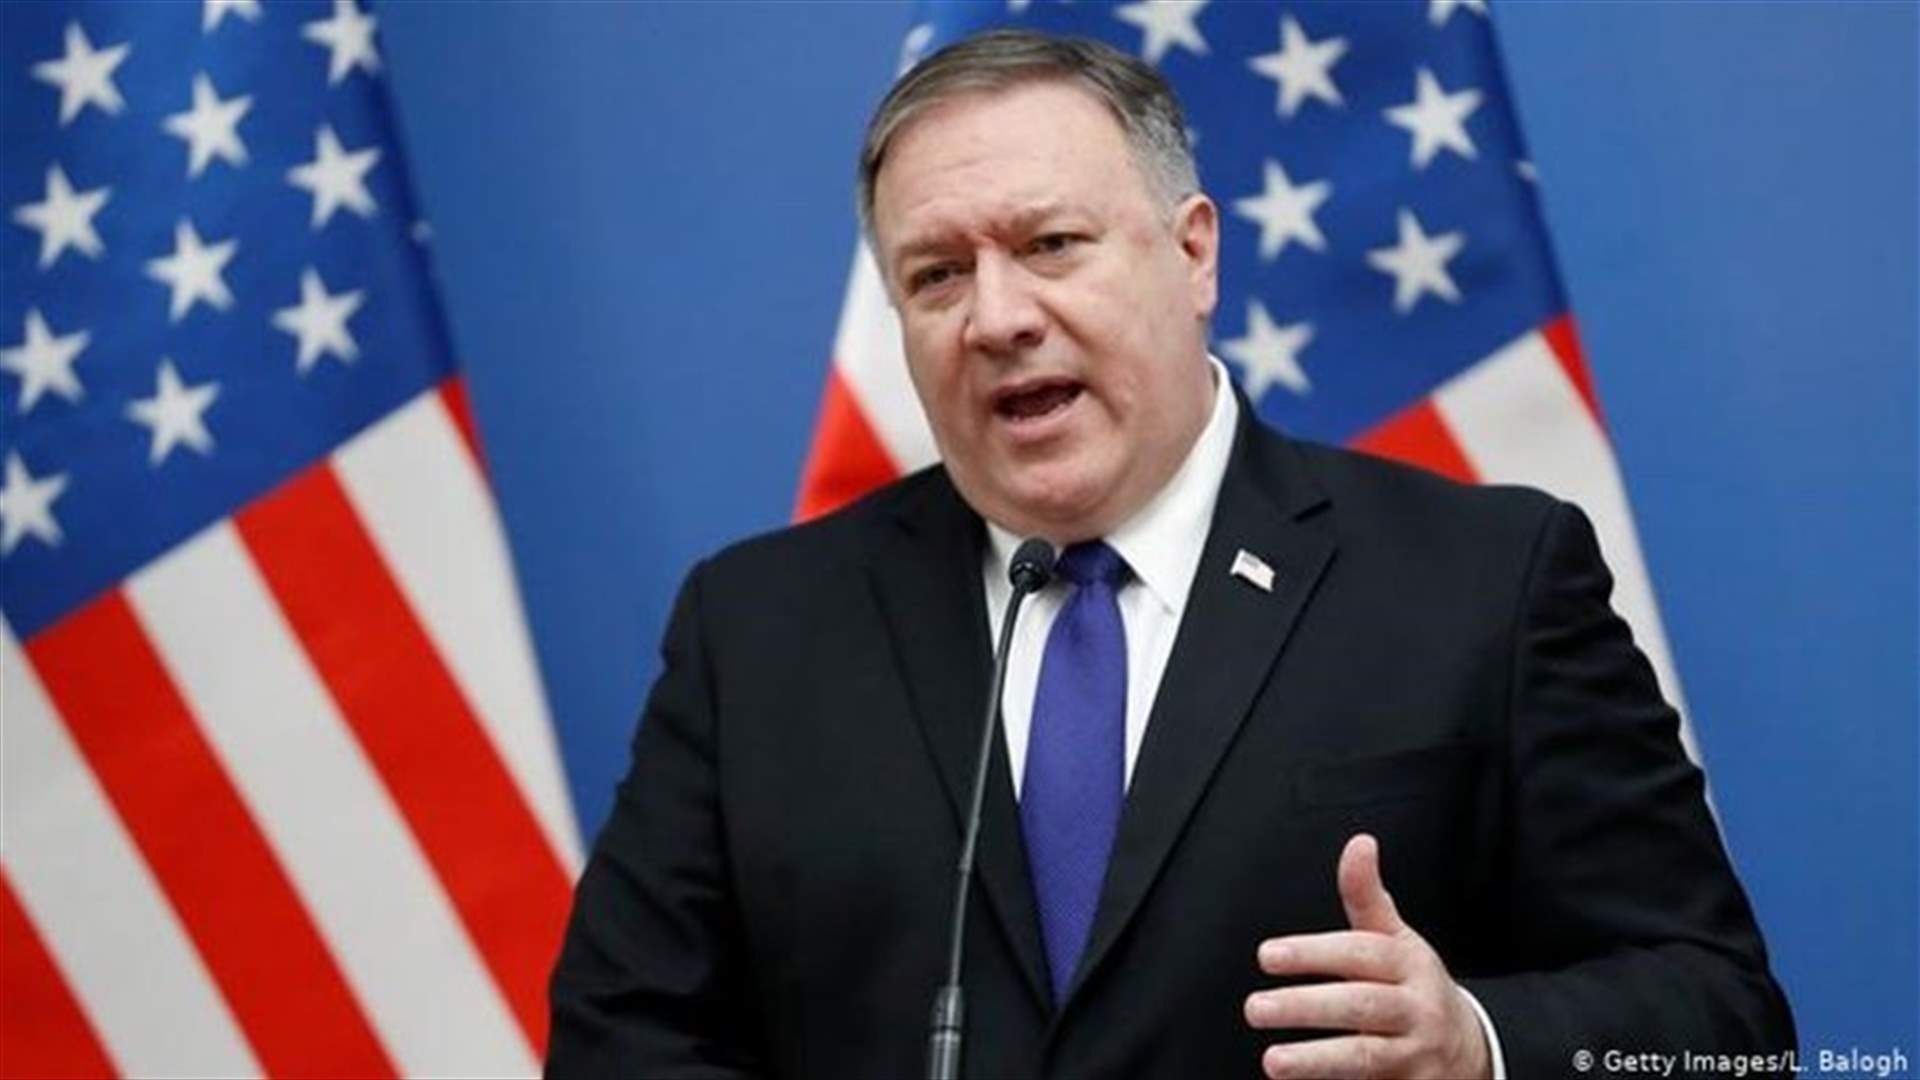 Pompeo says US mission is to avoid war with Iran but measures in place to deter